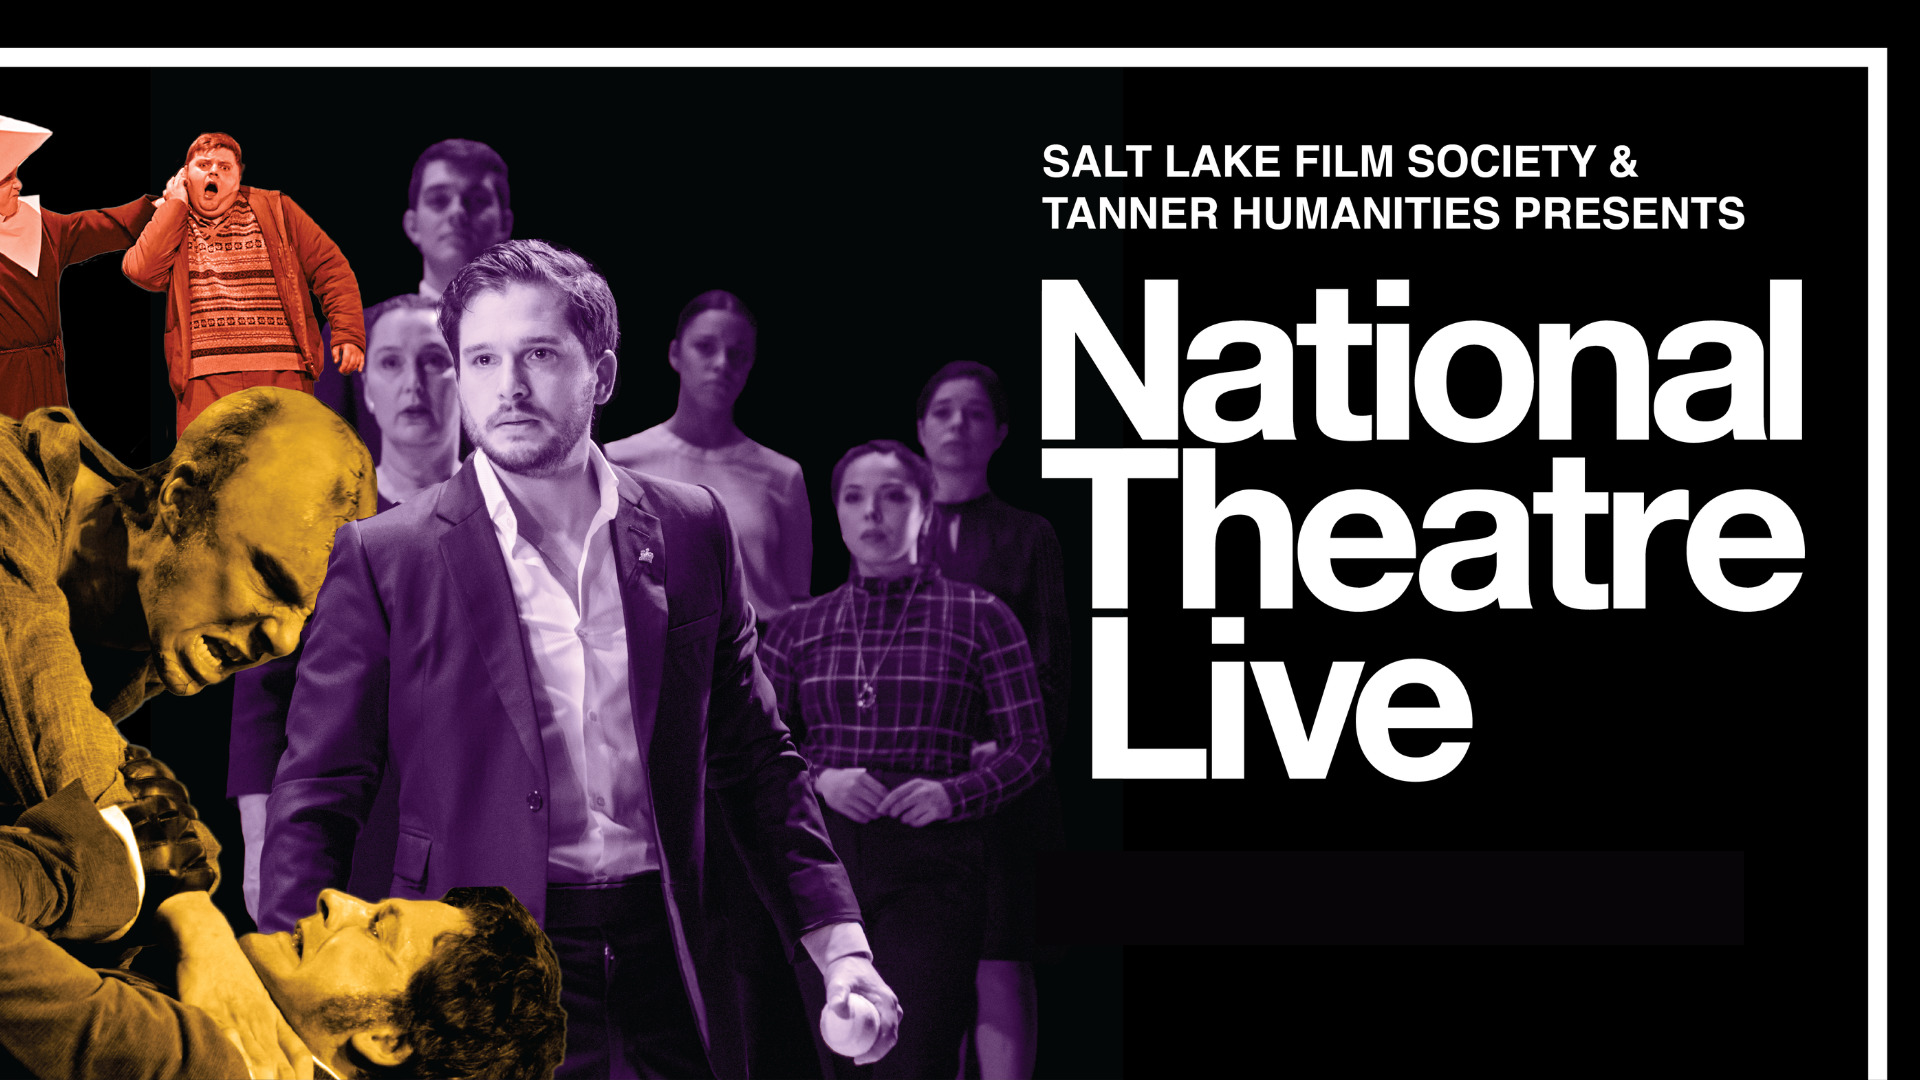 National Theatre Live returns to Broadway